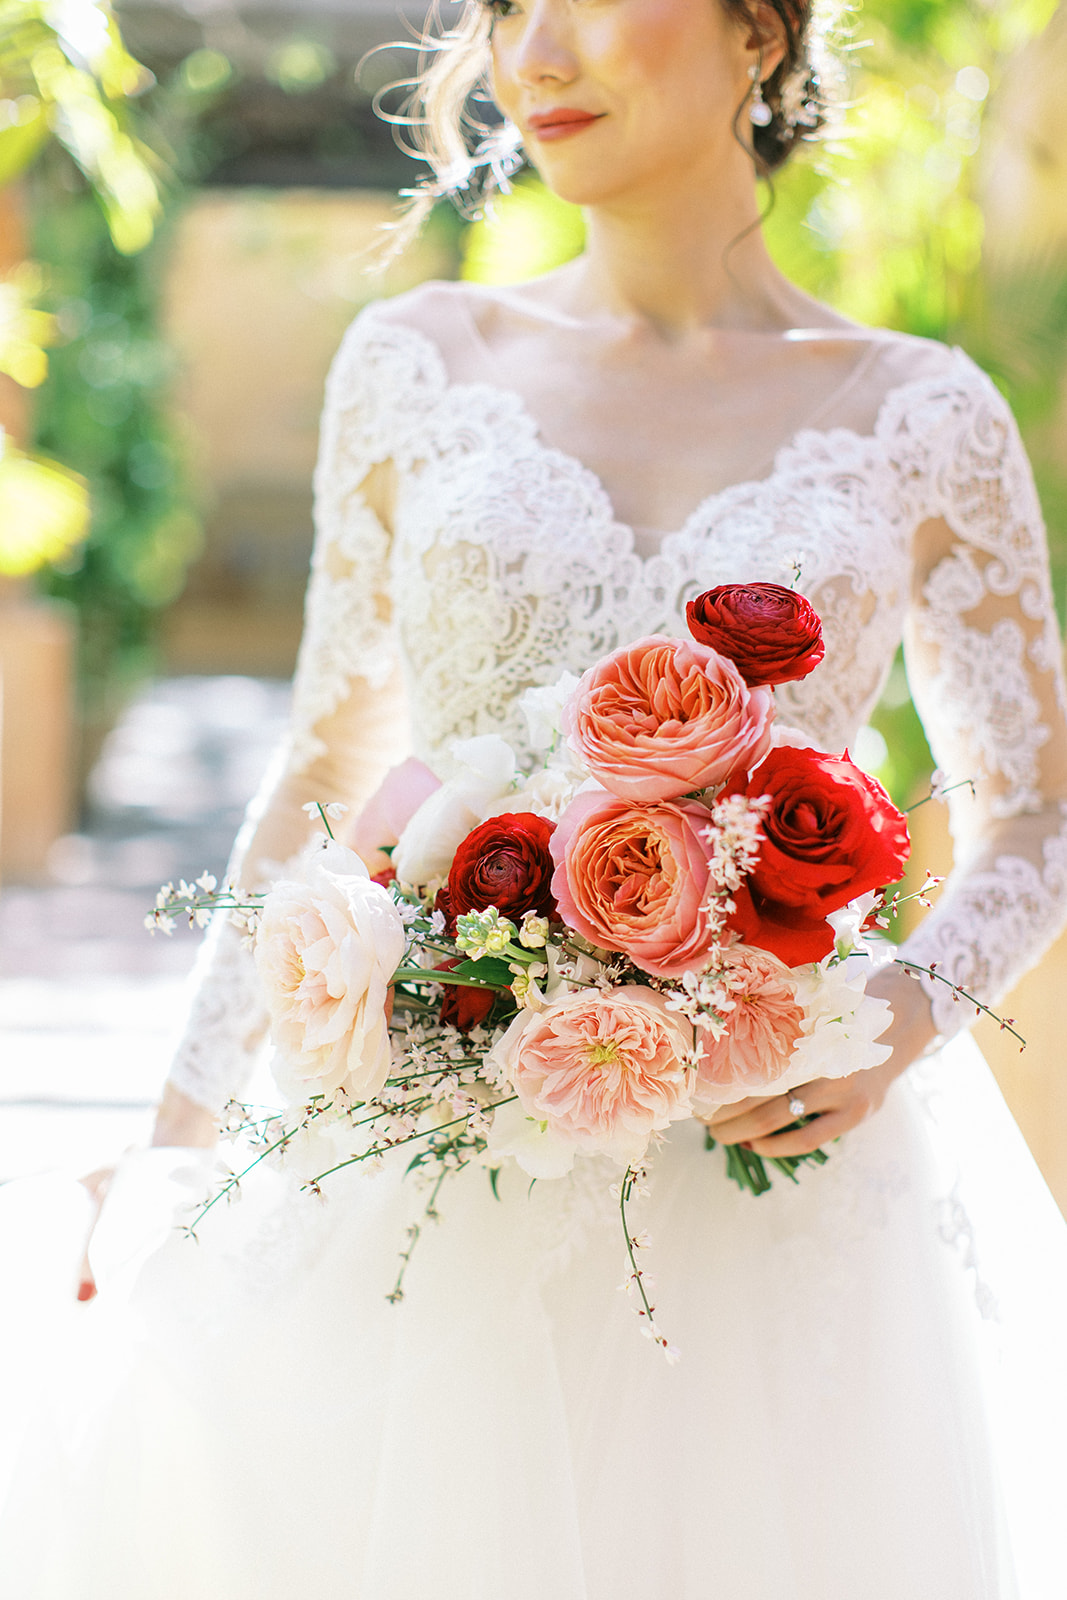 Bride looking off, holding bouquet of large pink, white, and red roses.